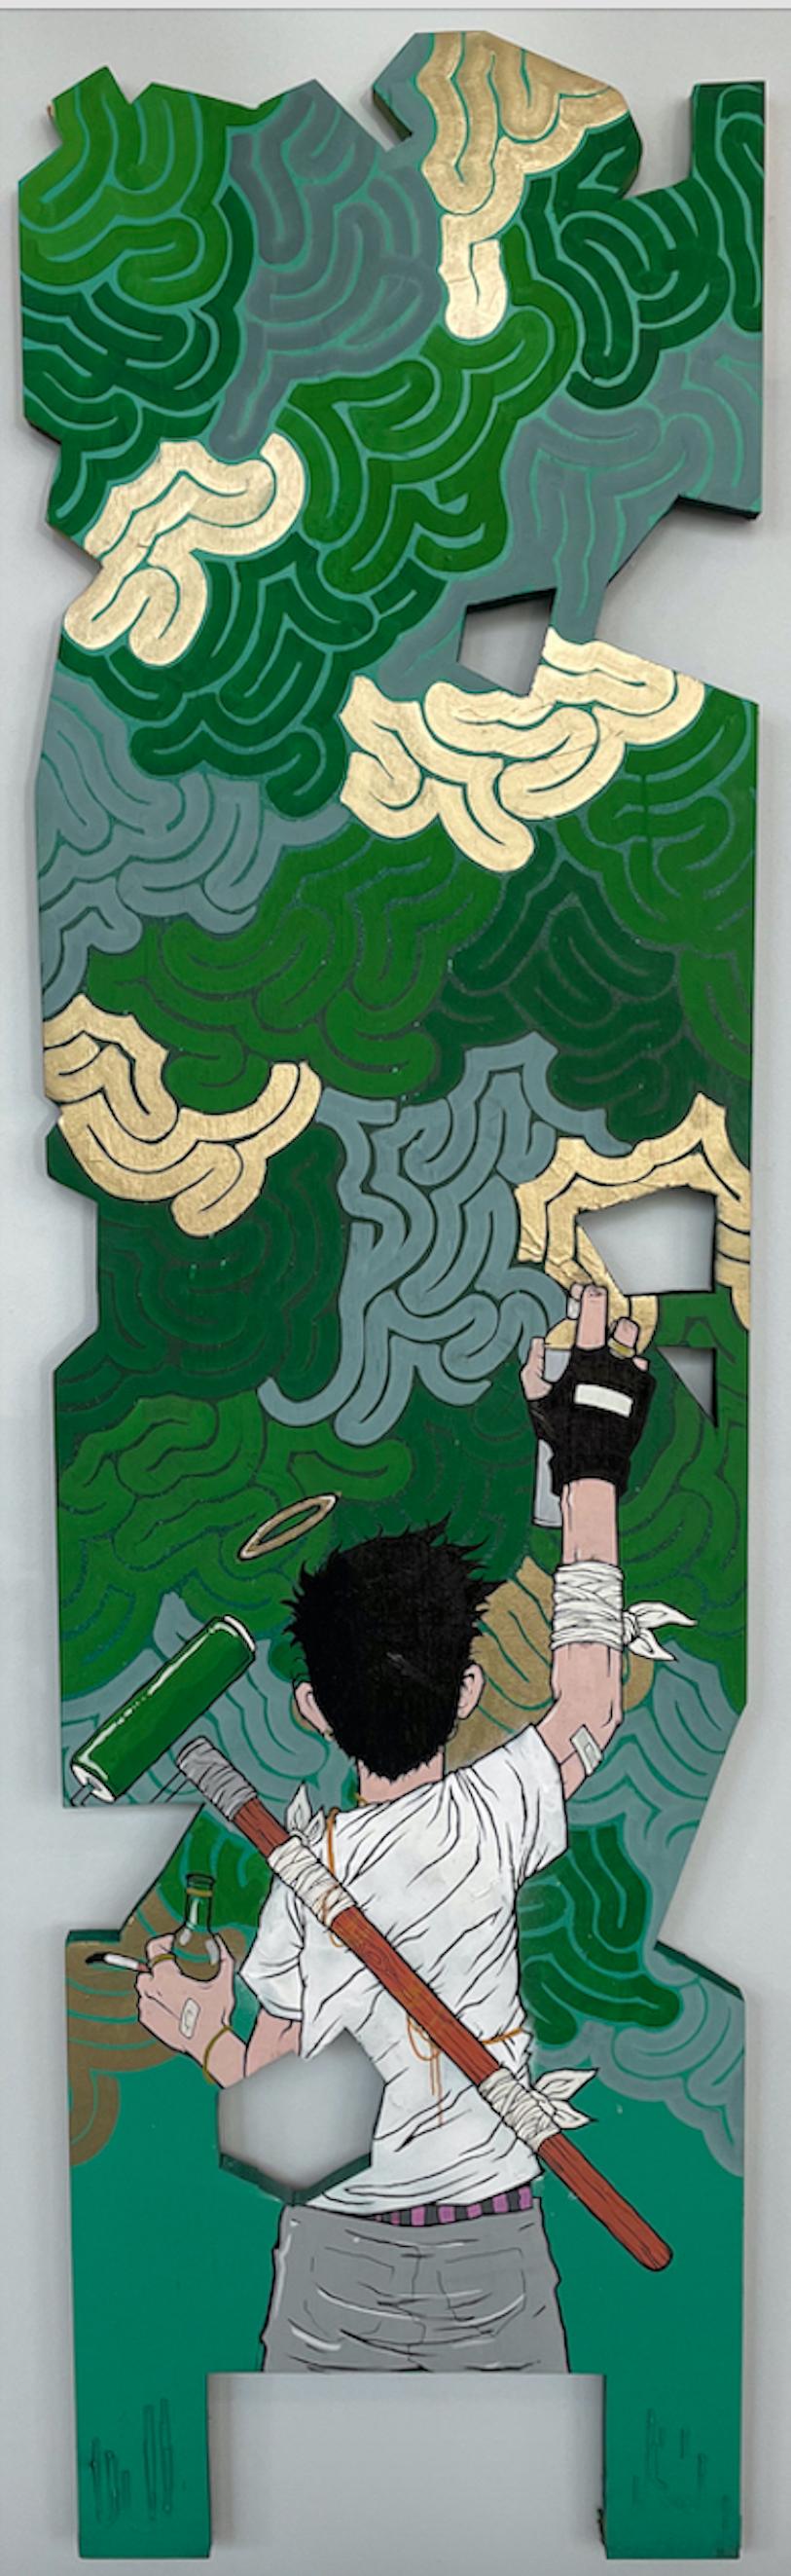 Ian Sullivan Abstract Painting - HE'S A GOOD KID, I SWEAR large street art painting in green and gold on wood